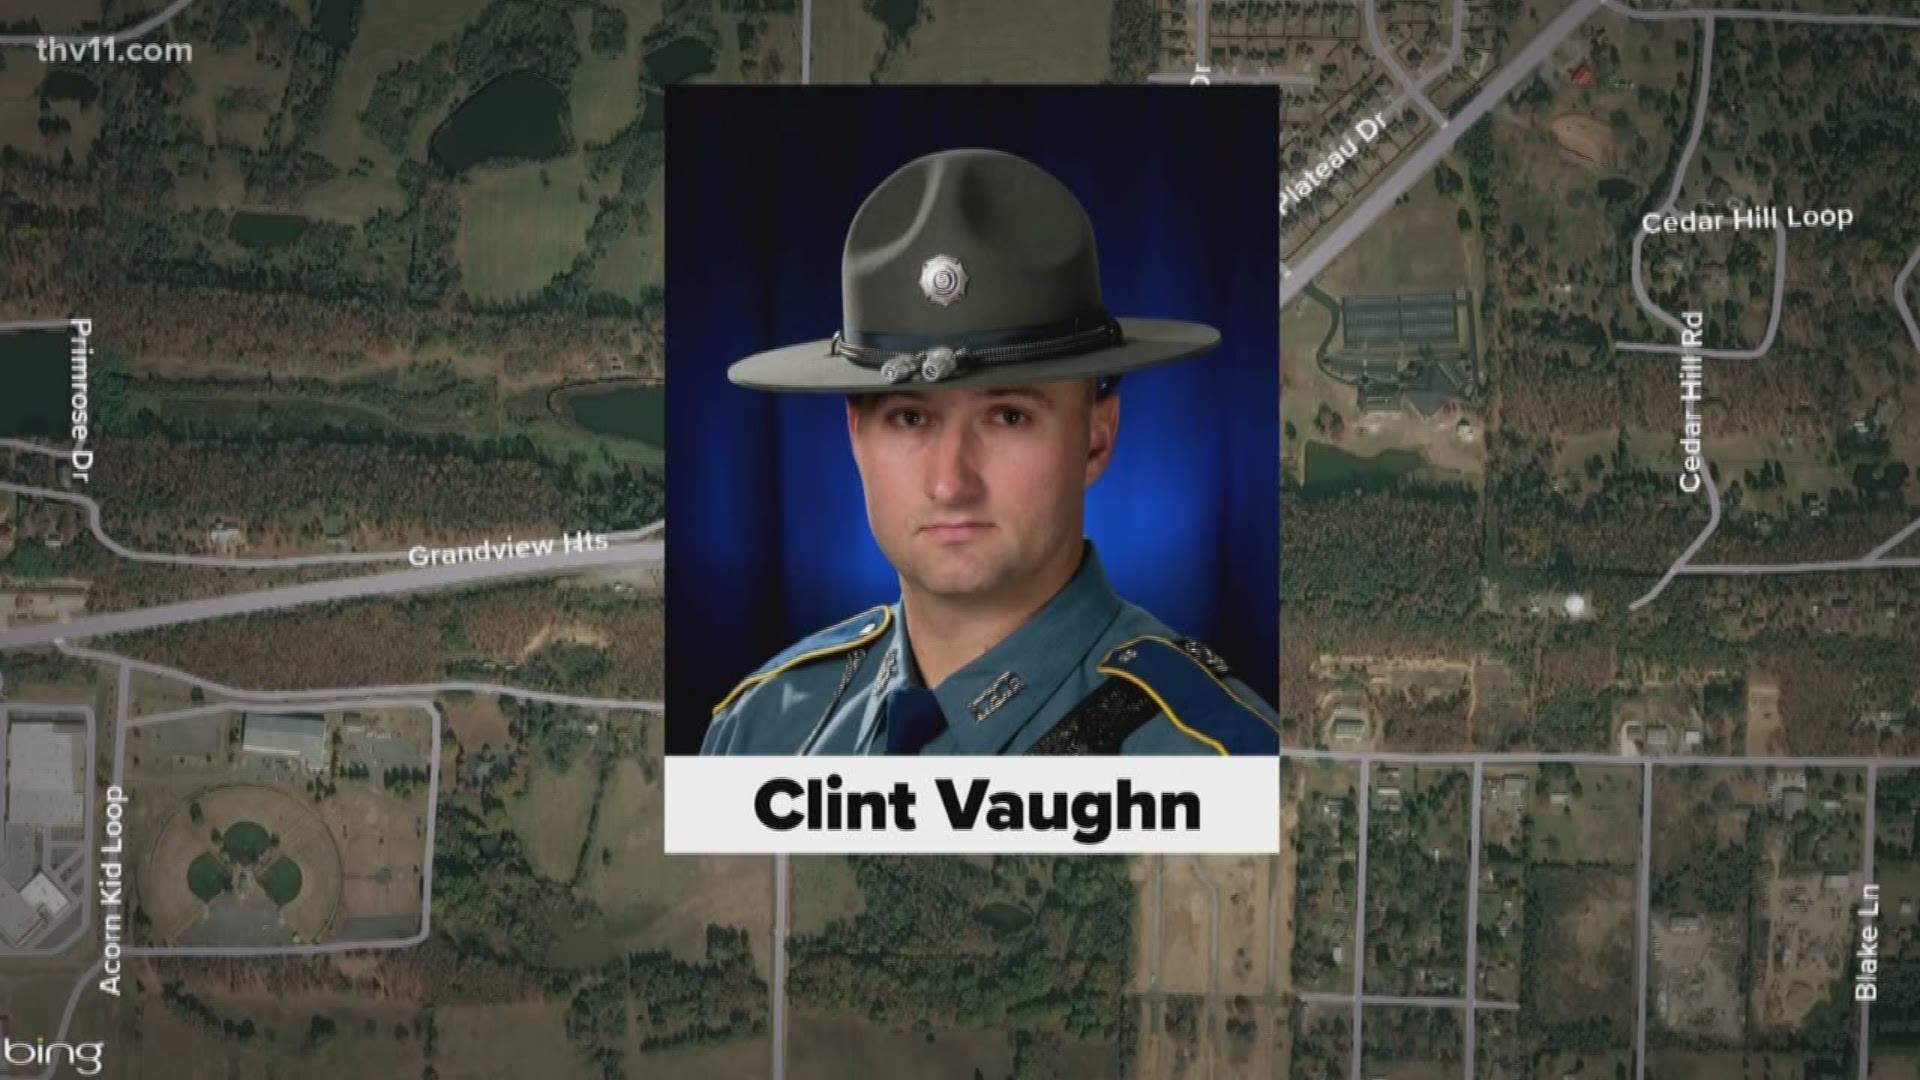 An Arkansas State Police trooper resigns and faces felony hit and run charges after a crash that left a woman injured.